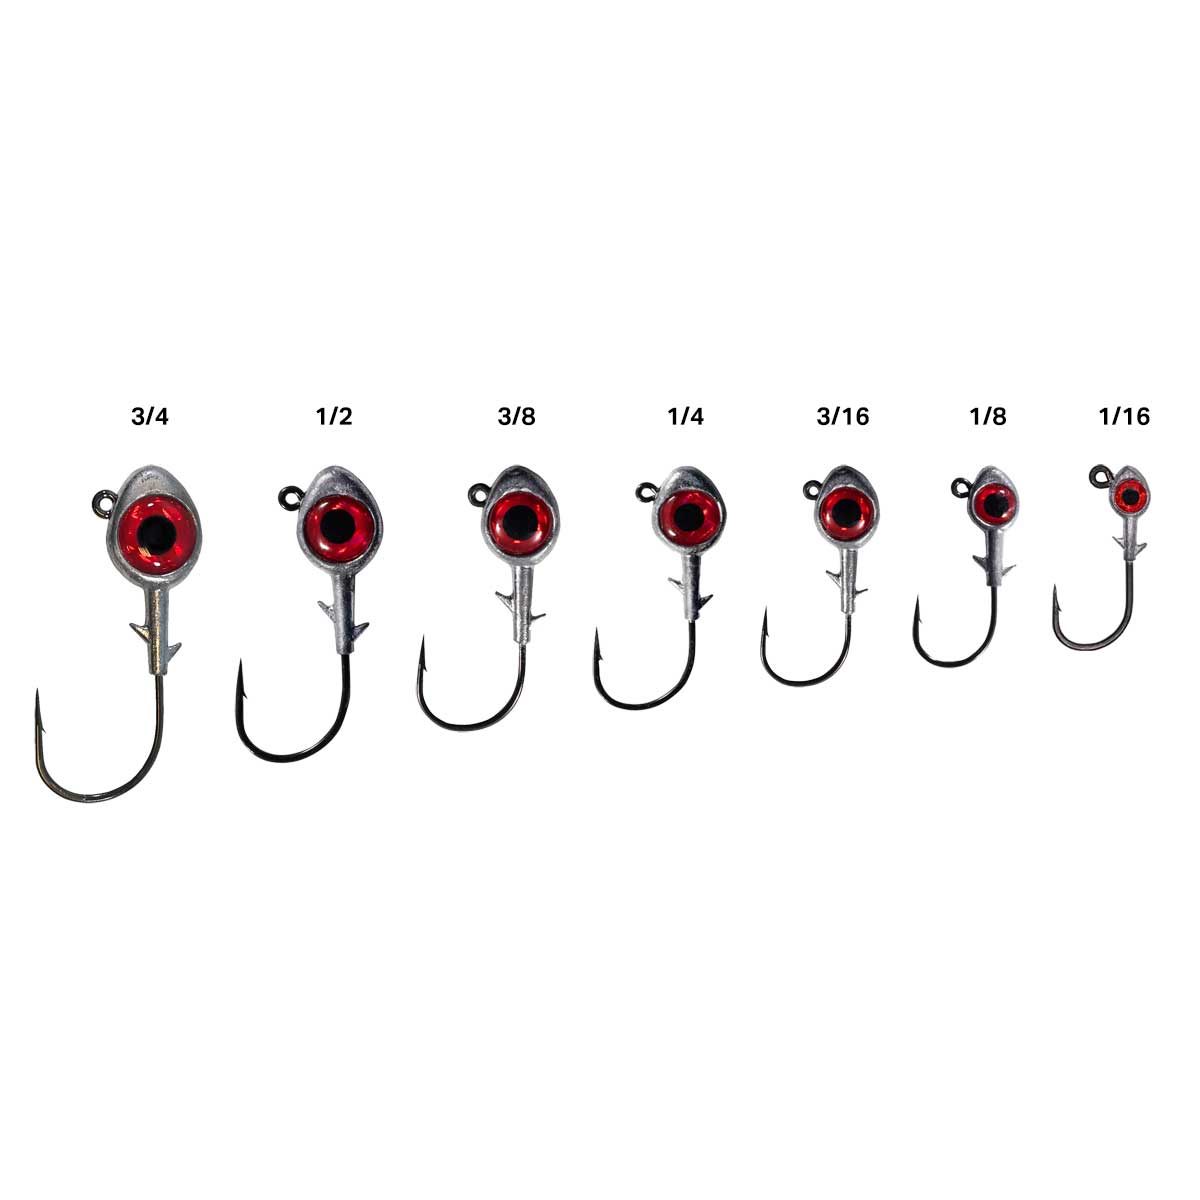 Crappie Day Paddle Tail Jigs(2) (8 pk) - Angler's Headquarters